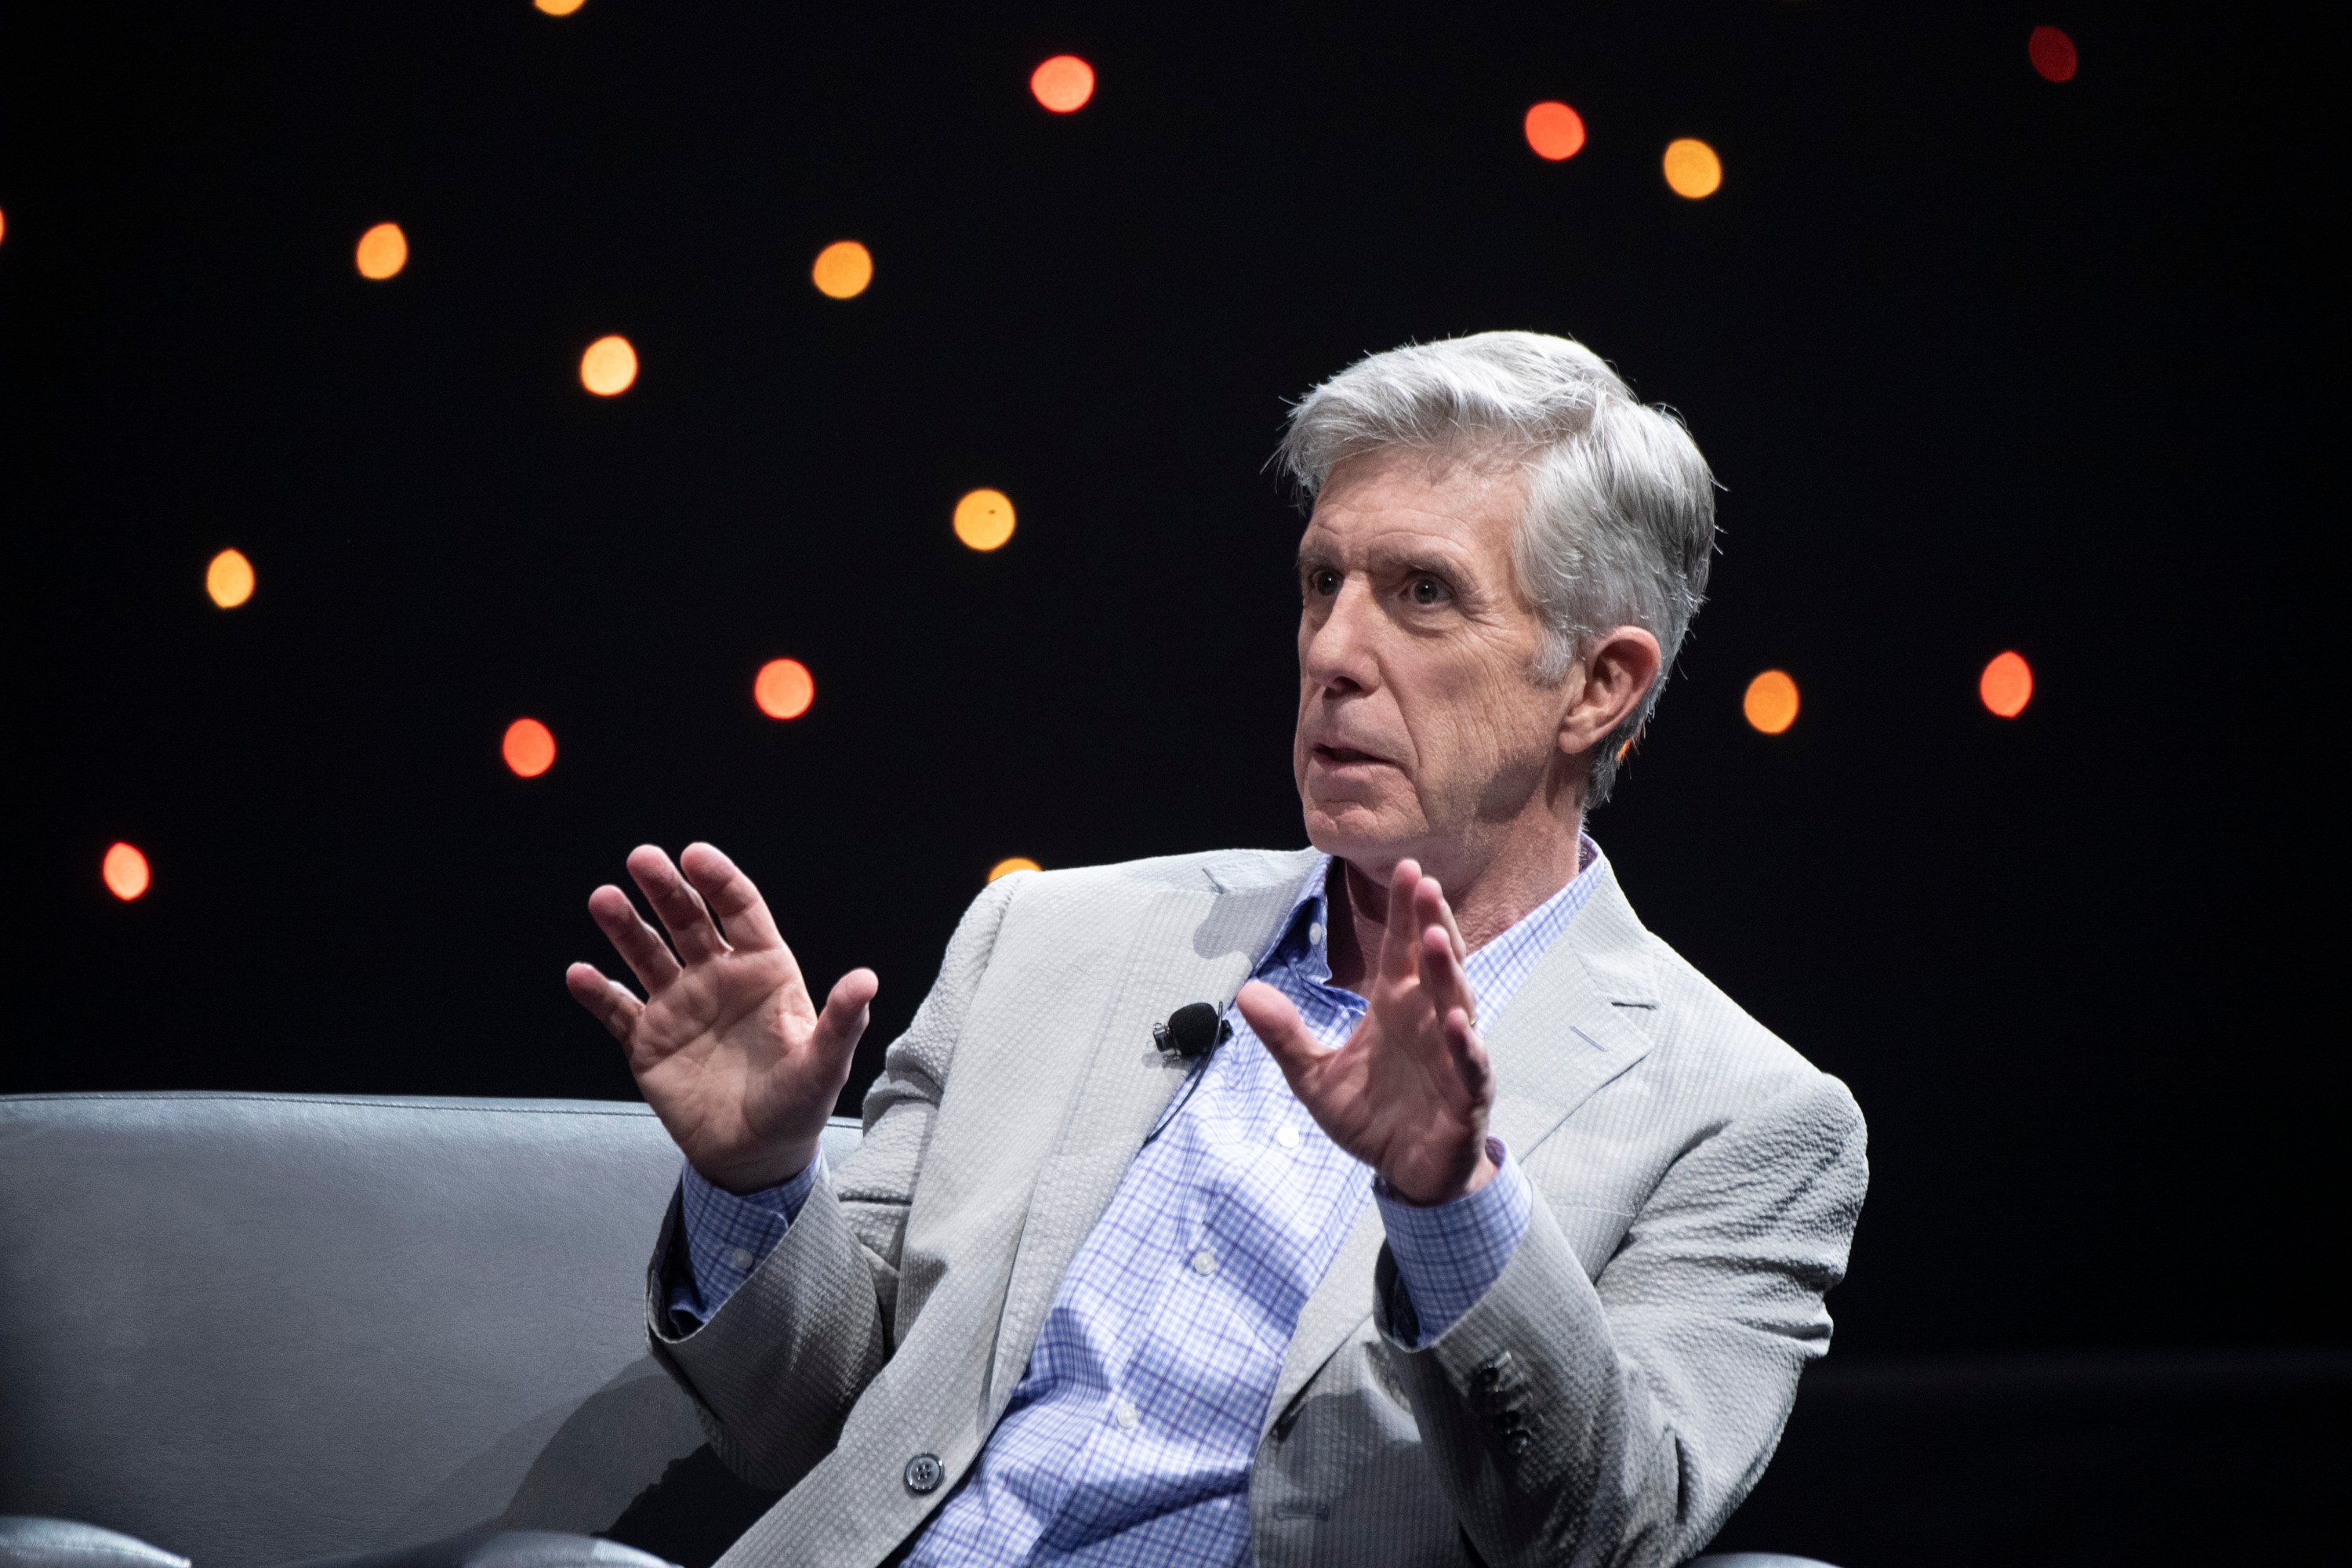 What is Former Dancing With the Stars Host Tom Bergerons Net Worth?